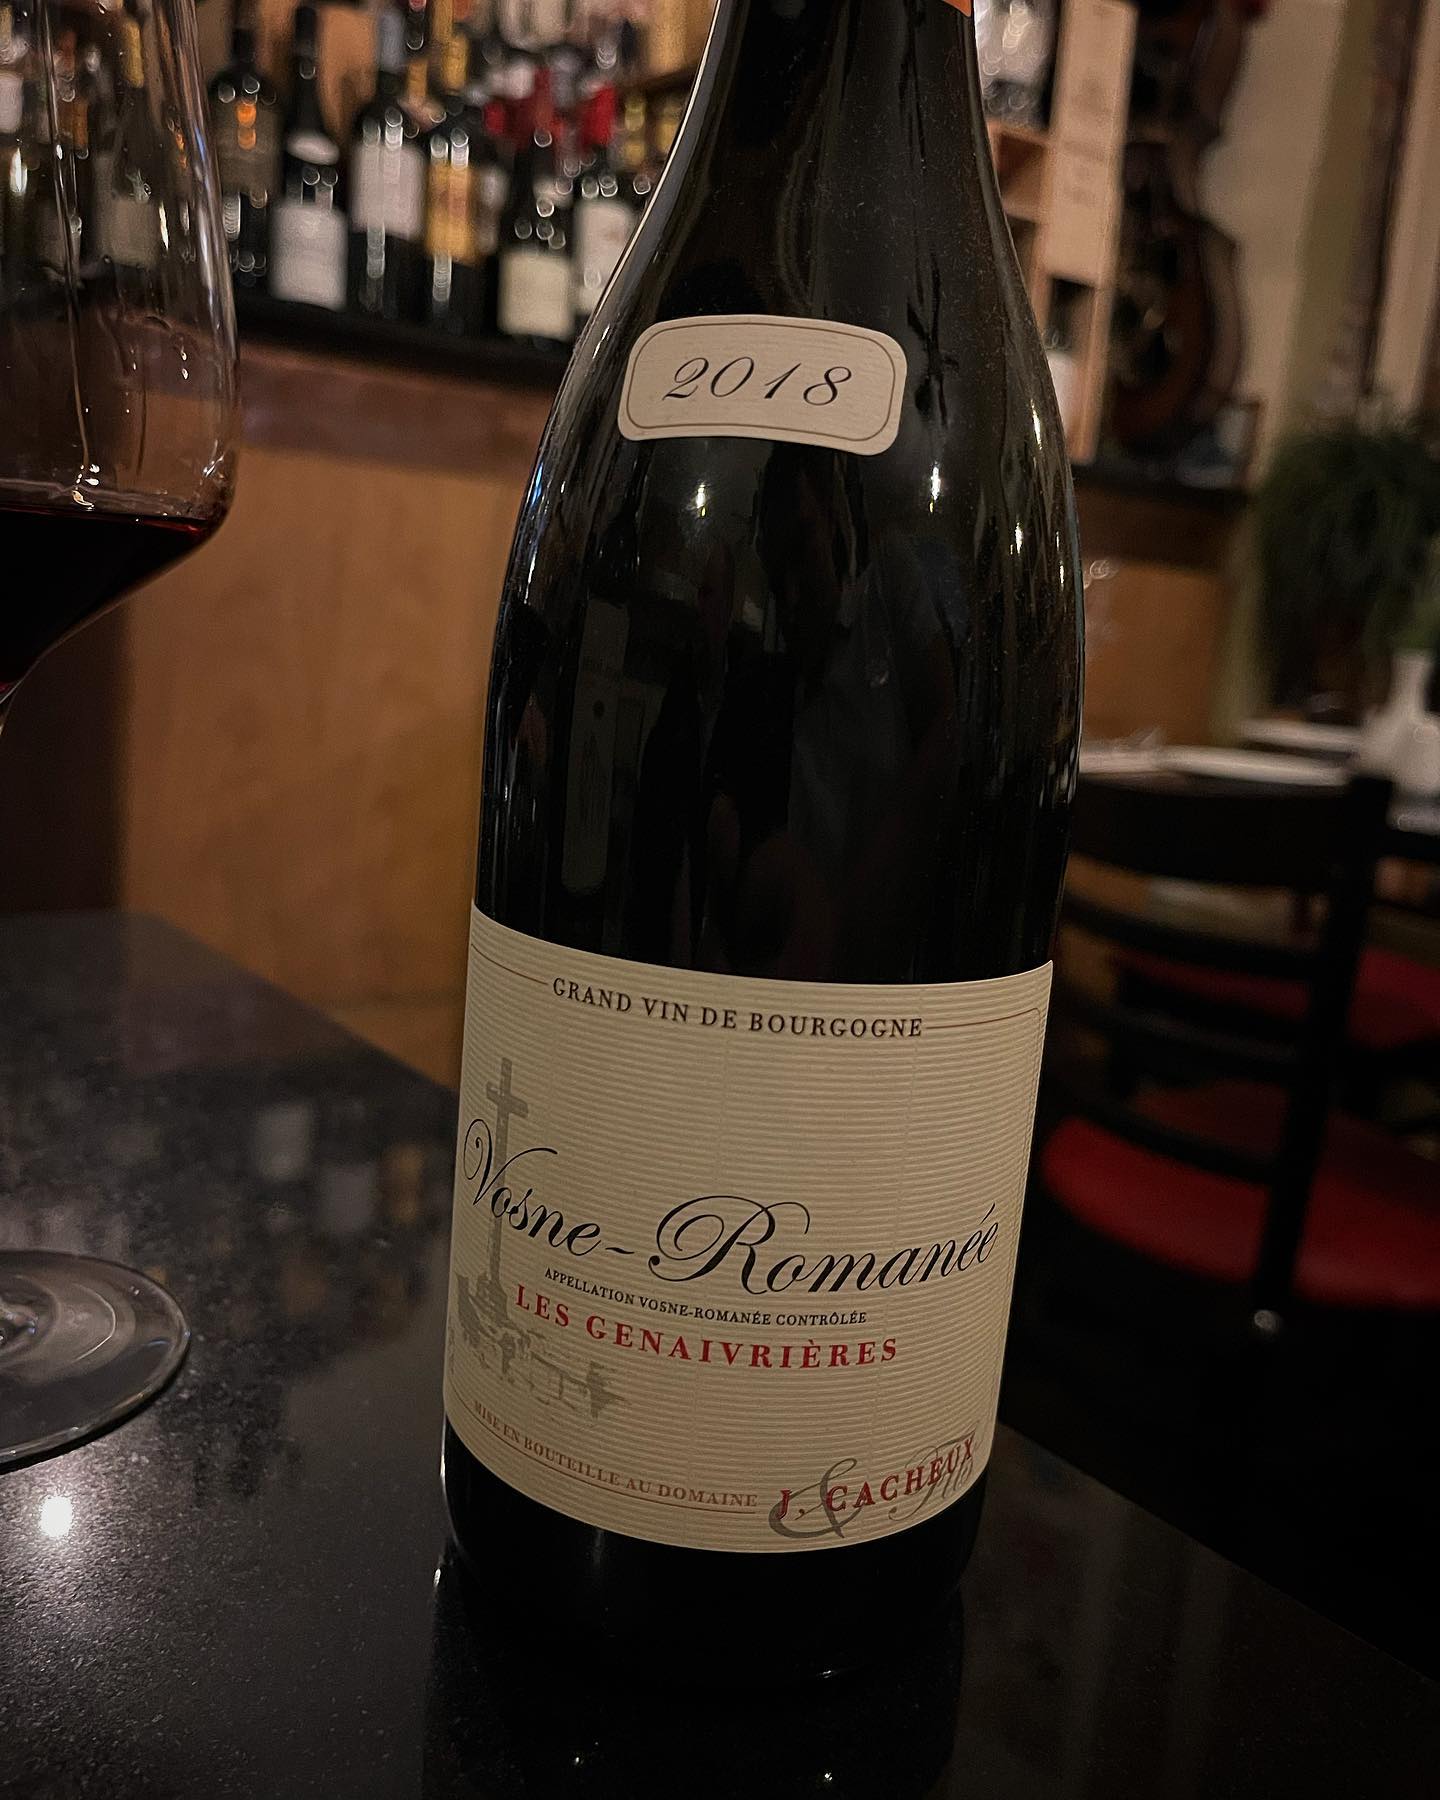 Vosne-Romanée🍷🇫🇷
The small commune of Vosne-Romanée is the Côte de Nuits’ brightest star, producing the finest and most expensive Pinot Noir wines in the world!! Come and try this beautiful wine at Locanta today 🤩

#vosneromanee #romanée #vosneromanée #redburgundy #burgundy #burgundywine #wine #winelover #winetasting #winelovers #winewinewine #winetime #wineoclock #winecountry #winebar #wineporn #winelife #birmingham #jq #jewelleryquarter #stpaulssquare #foodies